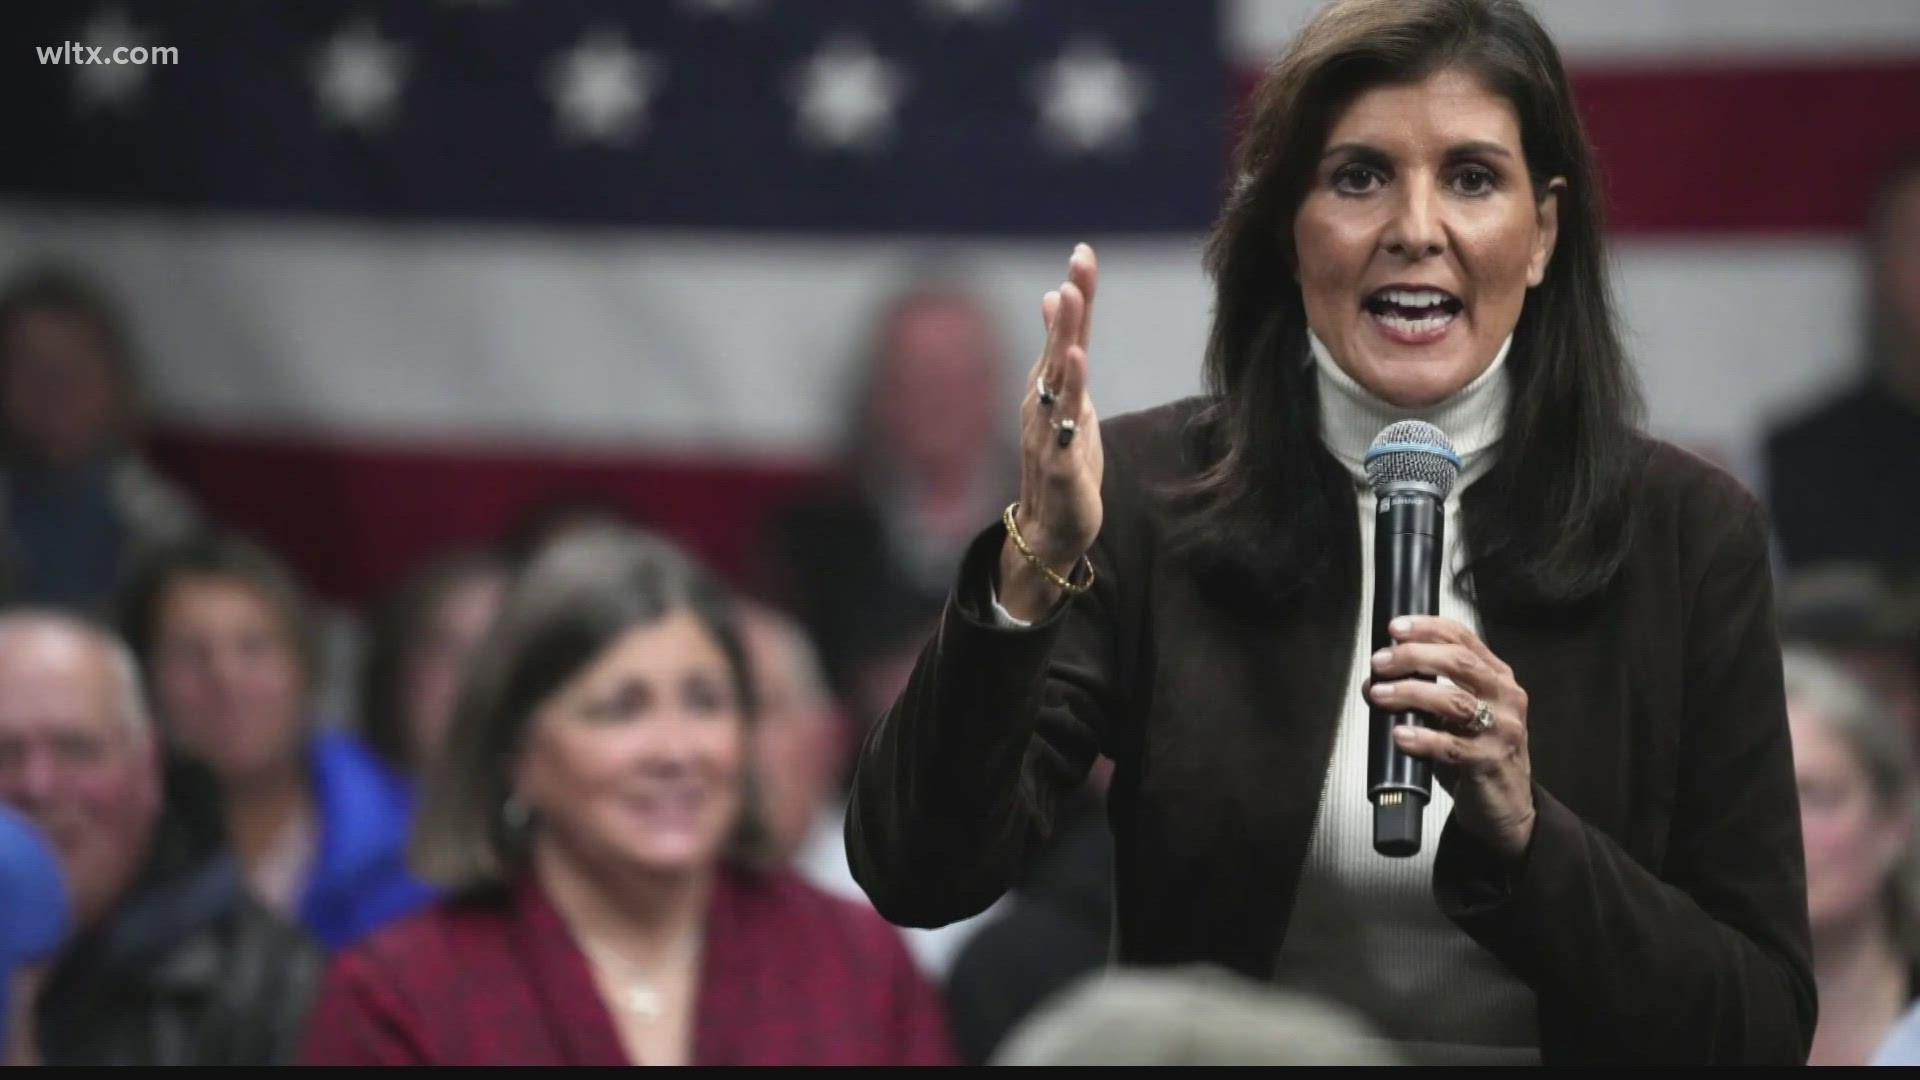 Republican presidential candidate Nikki Haley on Thursday sought to defend earlier comments that failed to mention slavery as a cause of the Civil War.